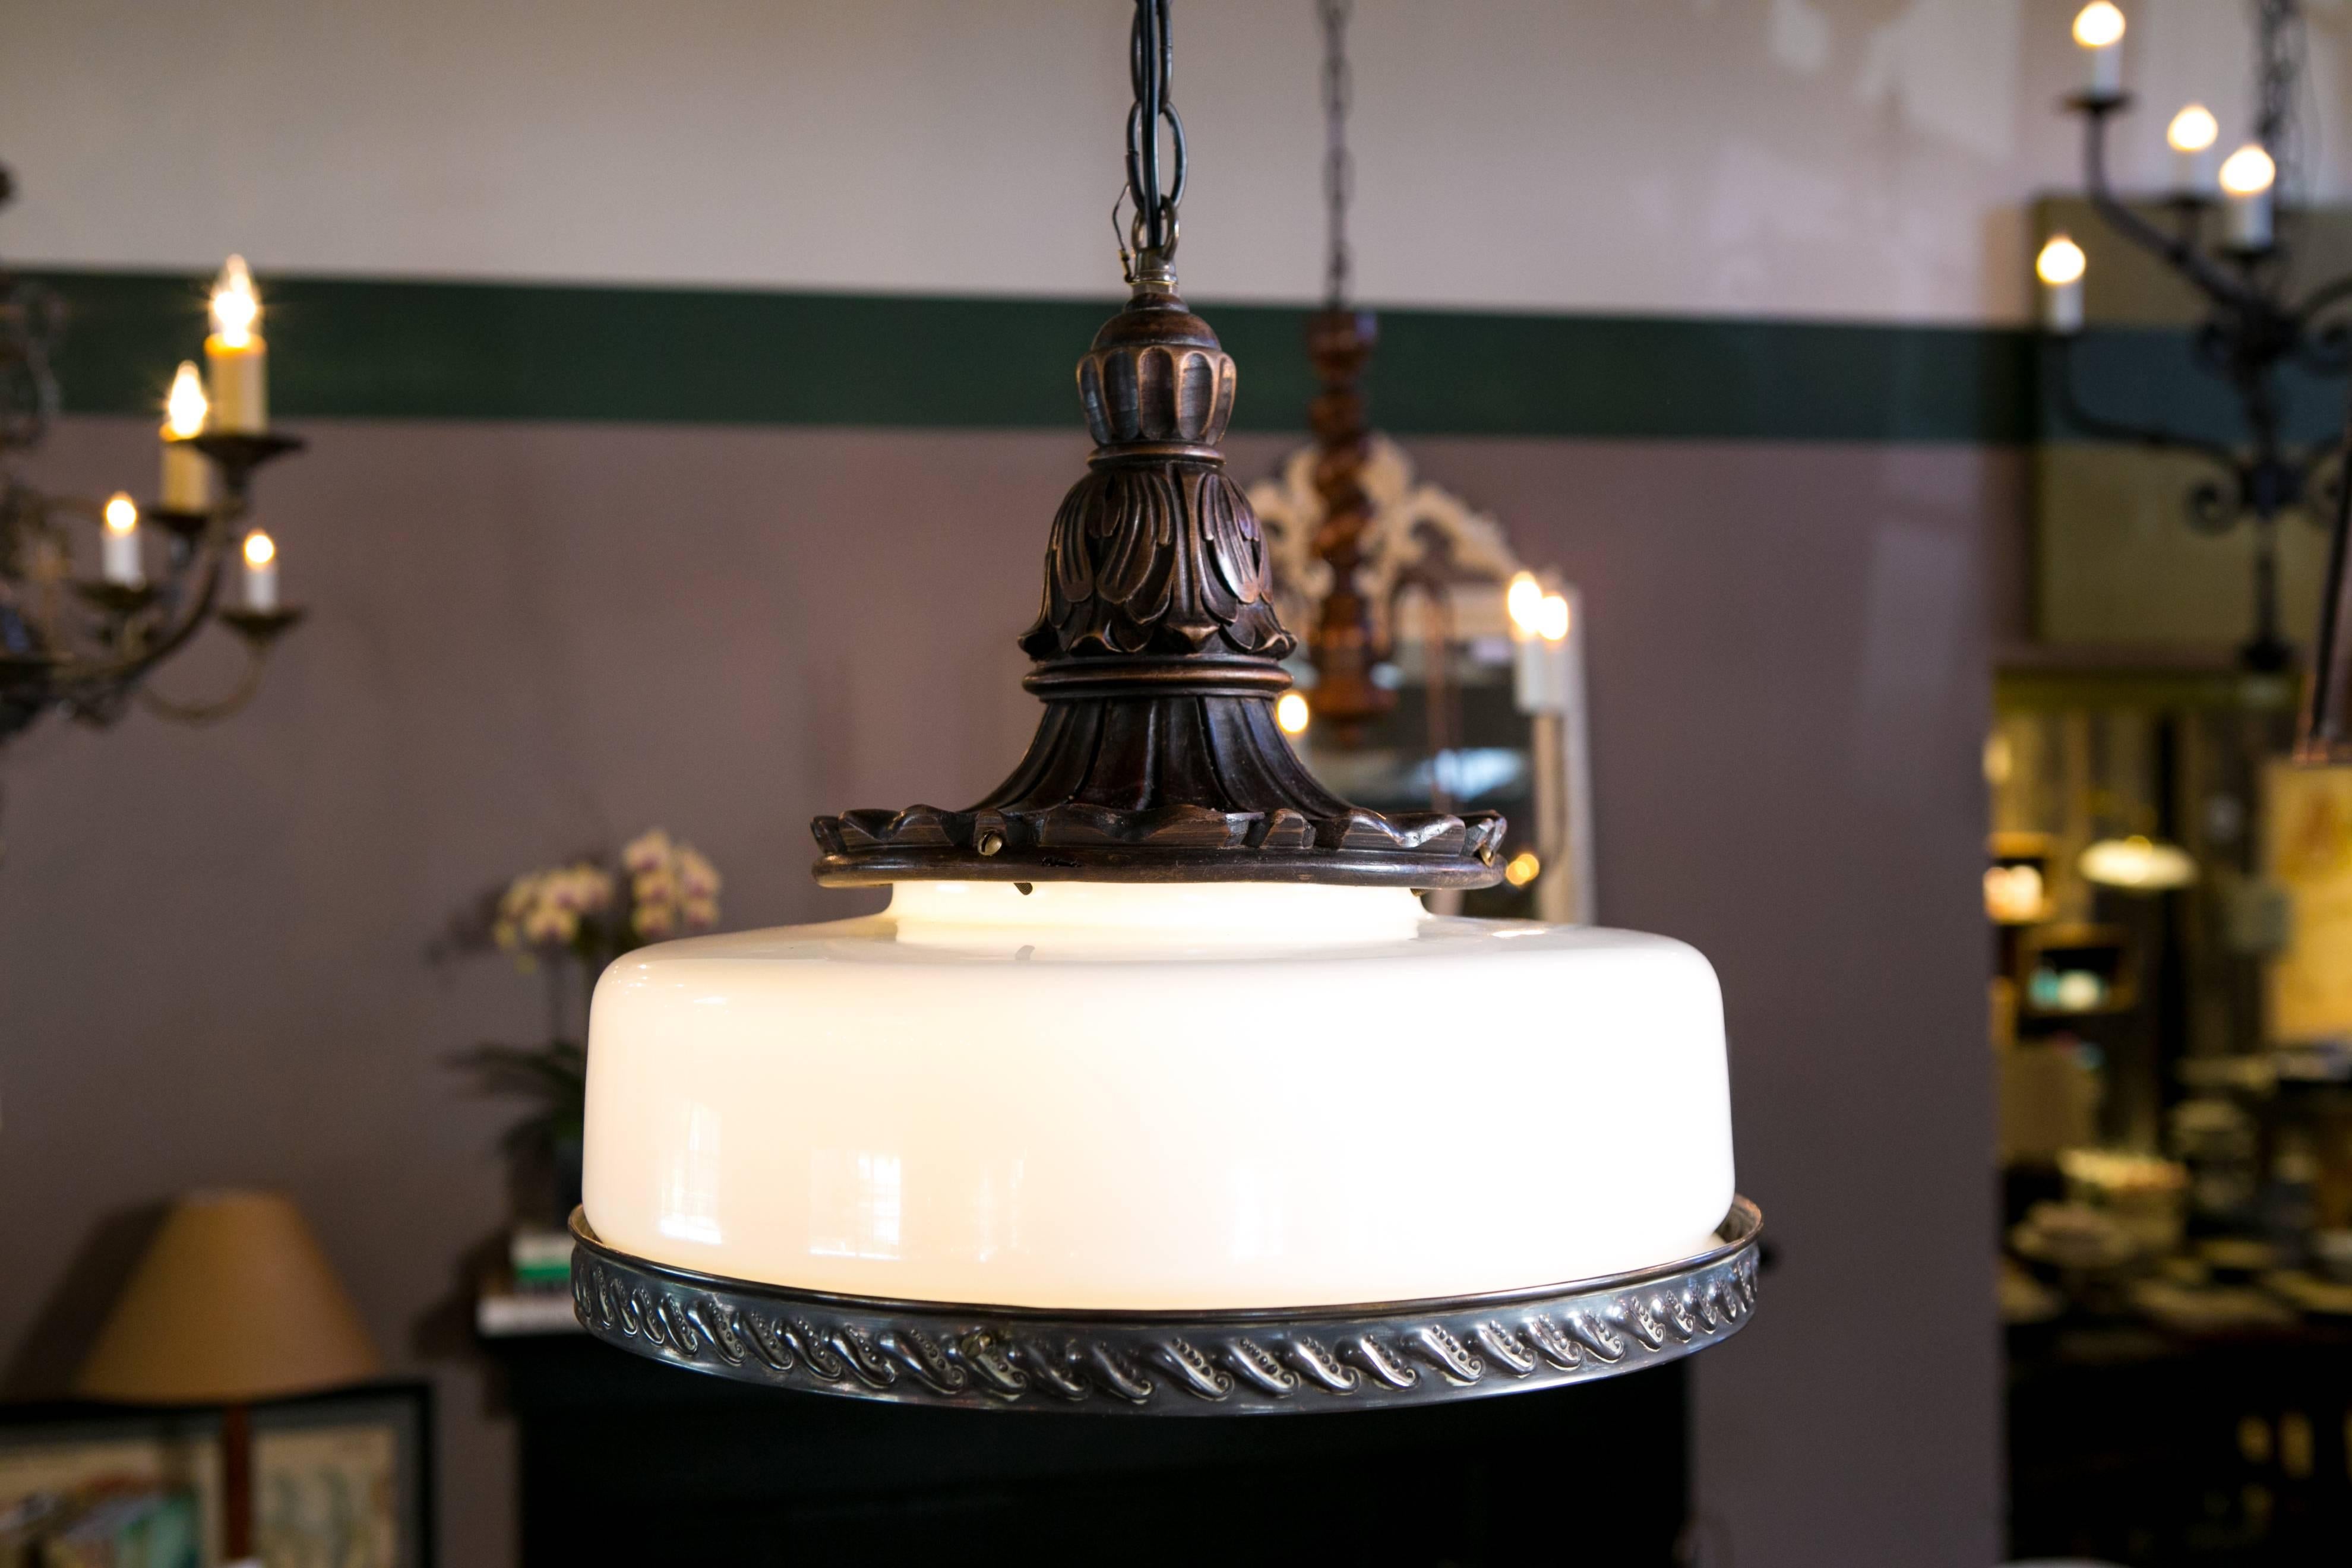 One of a kind hand blown vintage milk glass shade with stamped brass banding and a hand-carved antique wood top. Newly wired in the USA with all UL listed parts and a single porcelain Edison socket. Our exclusive design made from vintage and antique